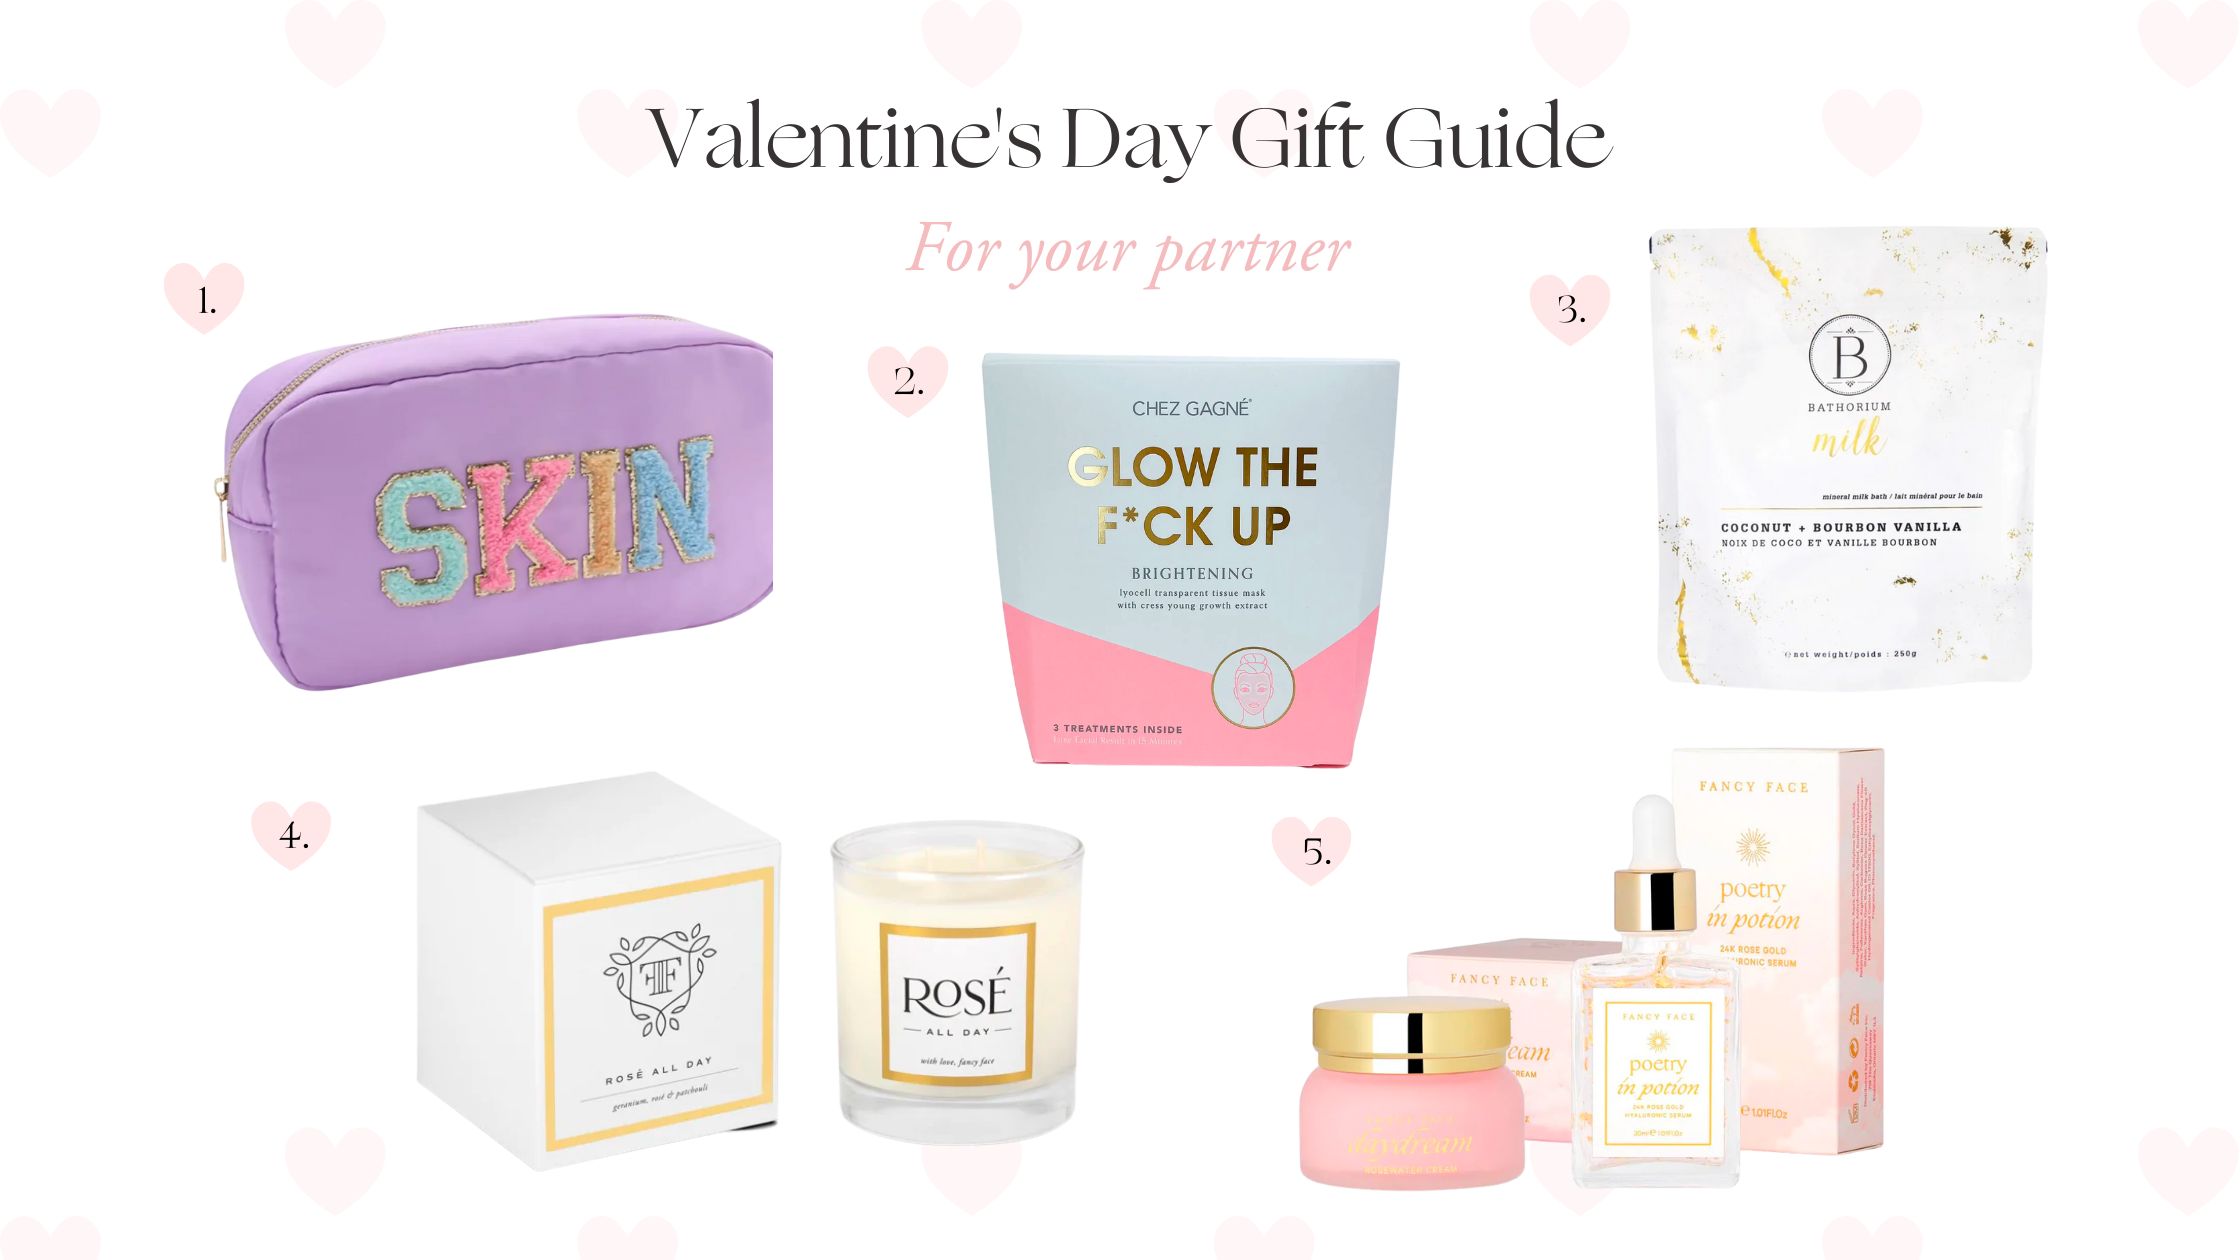 Valentine's Day Gifts for your Partner